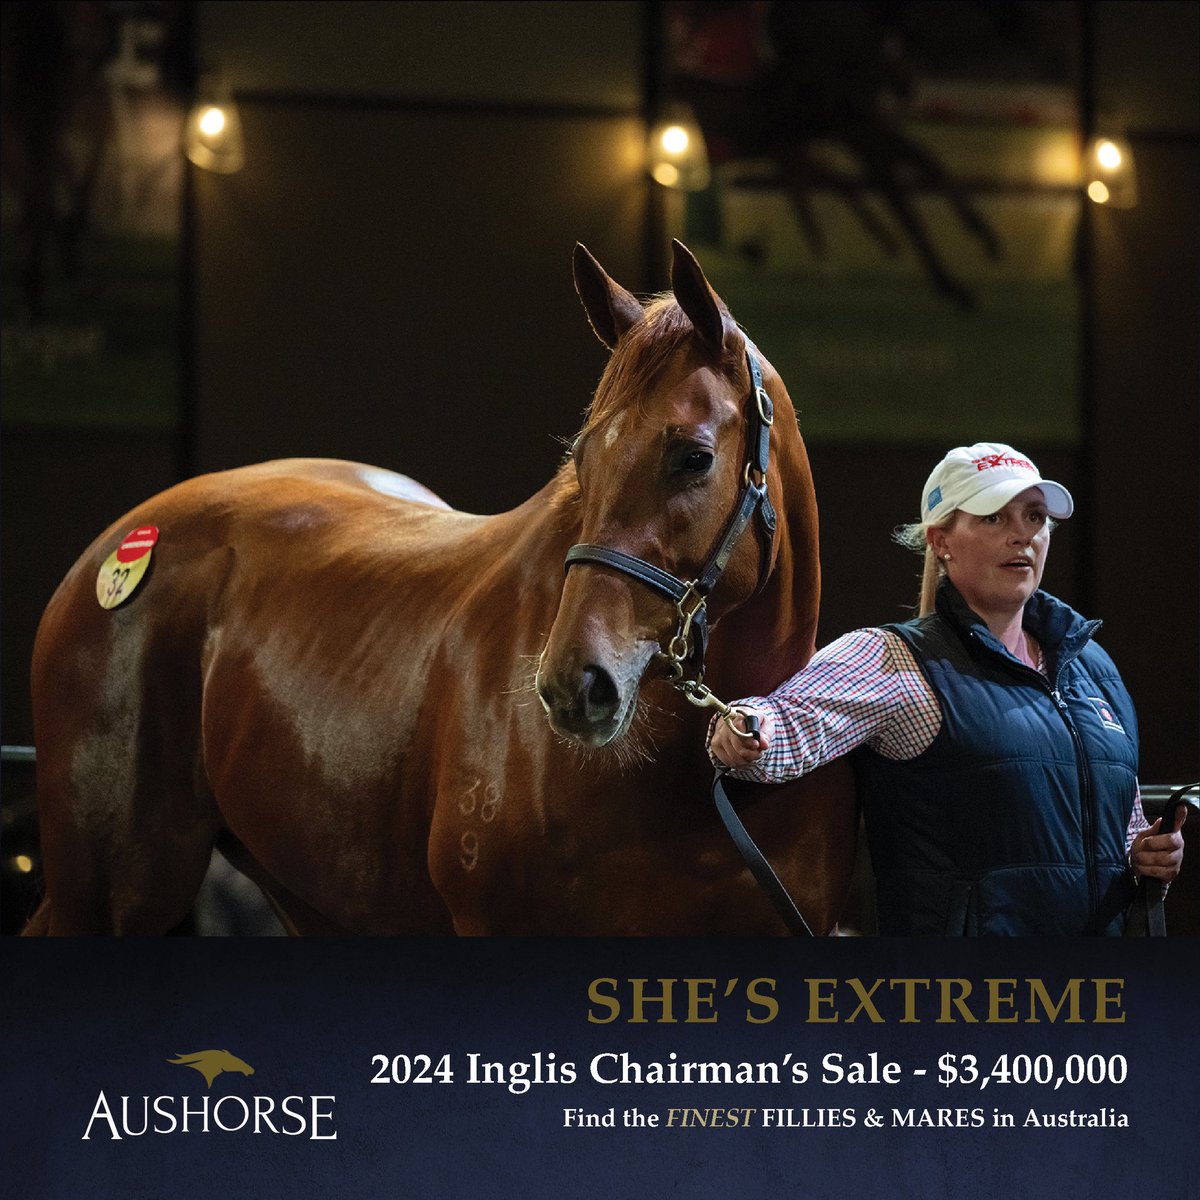 An extreme result. Sold by Willow Park Stud for $275K to Anthony Cummings Thoroughbreds at the 2021 Inglis Easter yearling sale, She’s Extreme is one of only 11 fillies to win a Group One as a 2YO and 3YO over the past 20 years. A winner of over $1.6 million in prizemoney, she